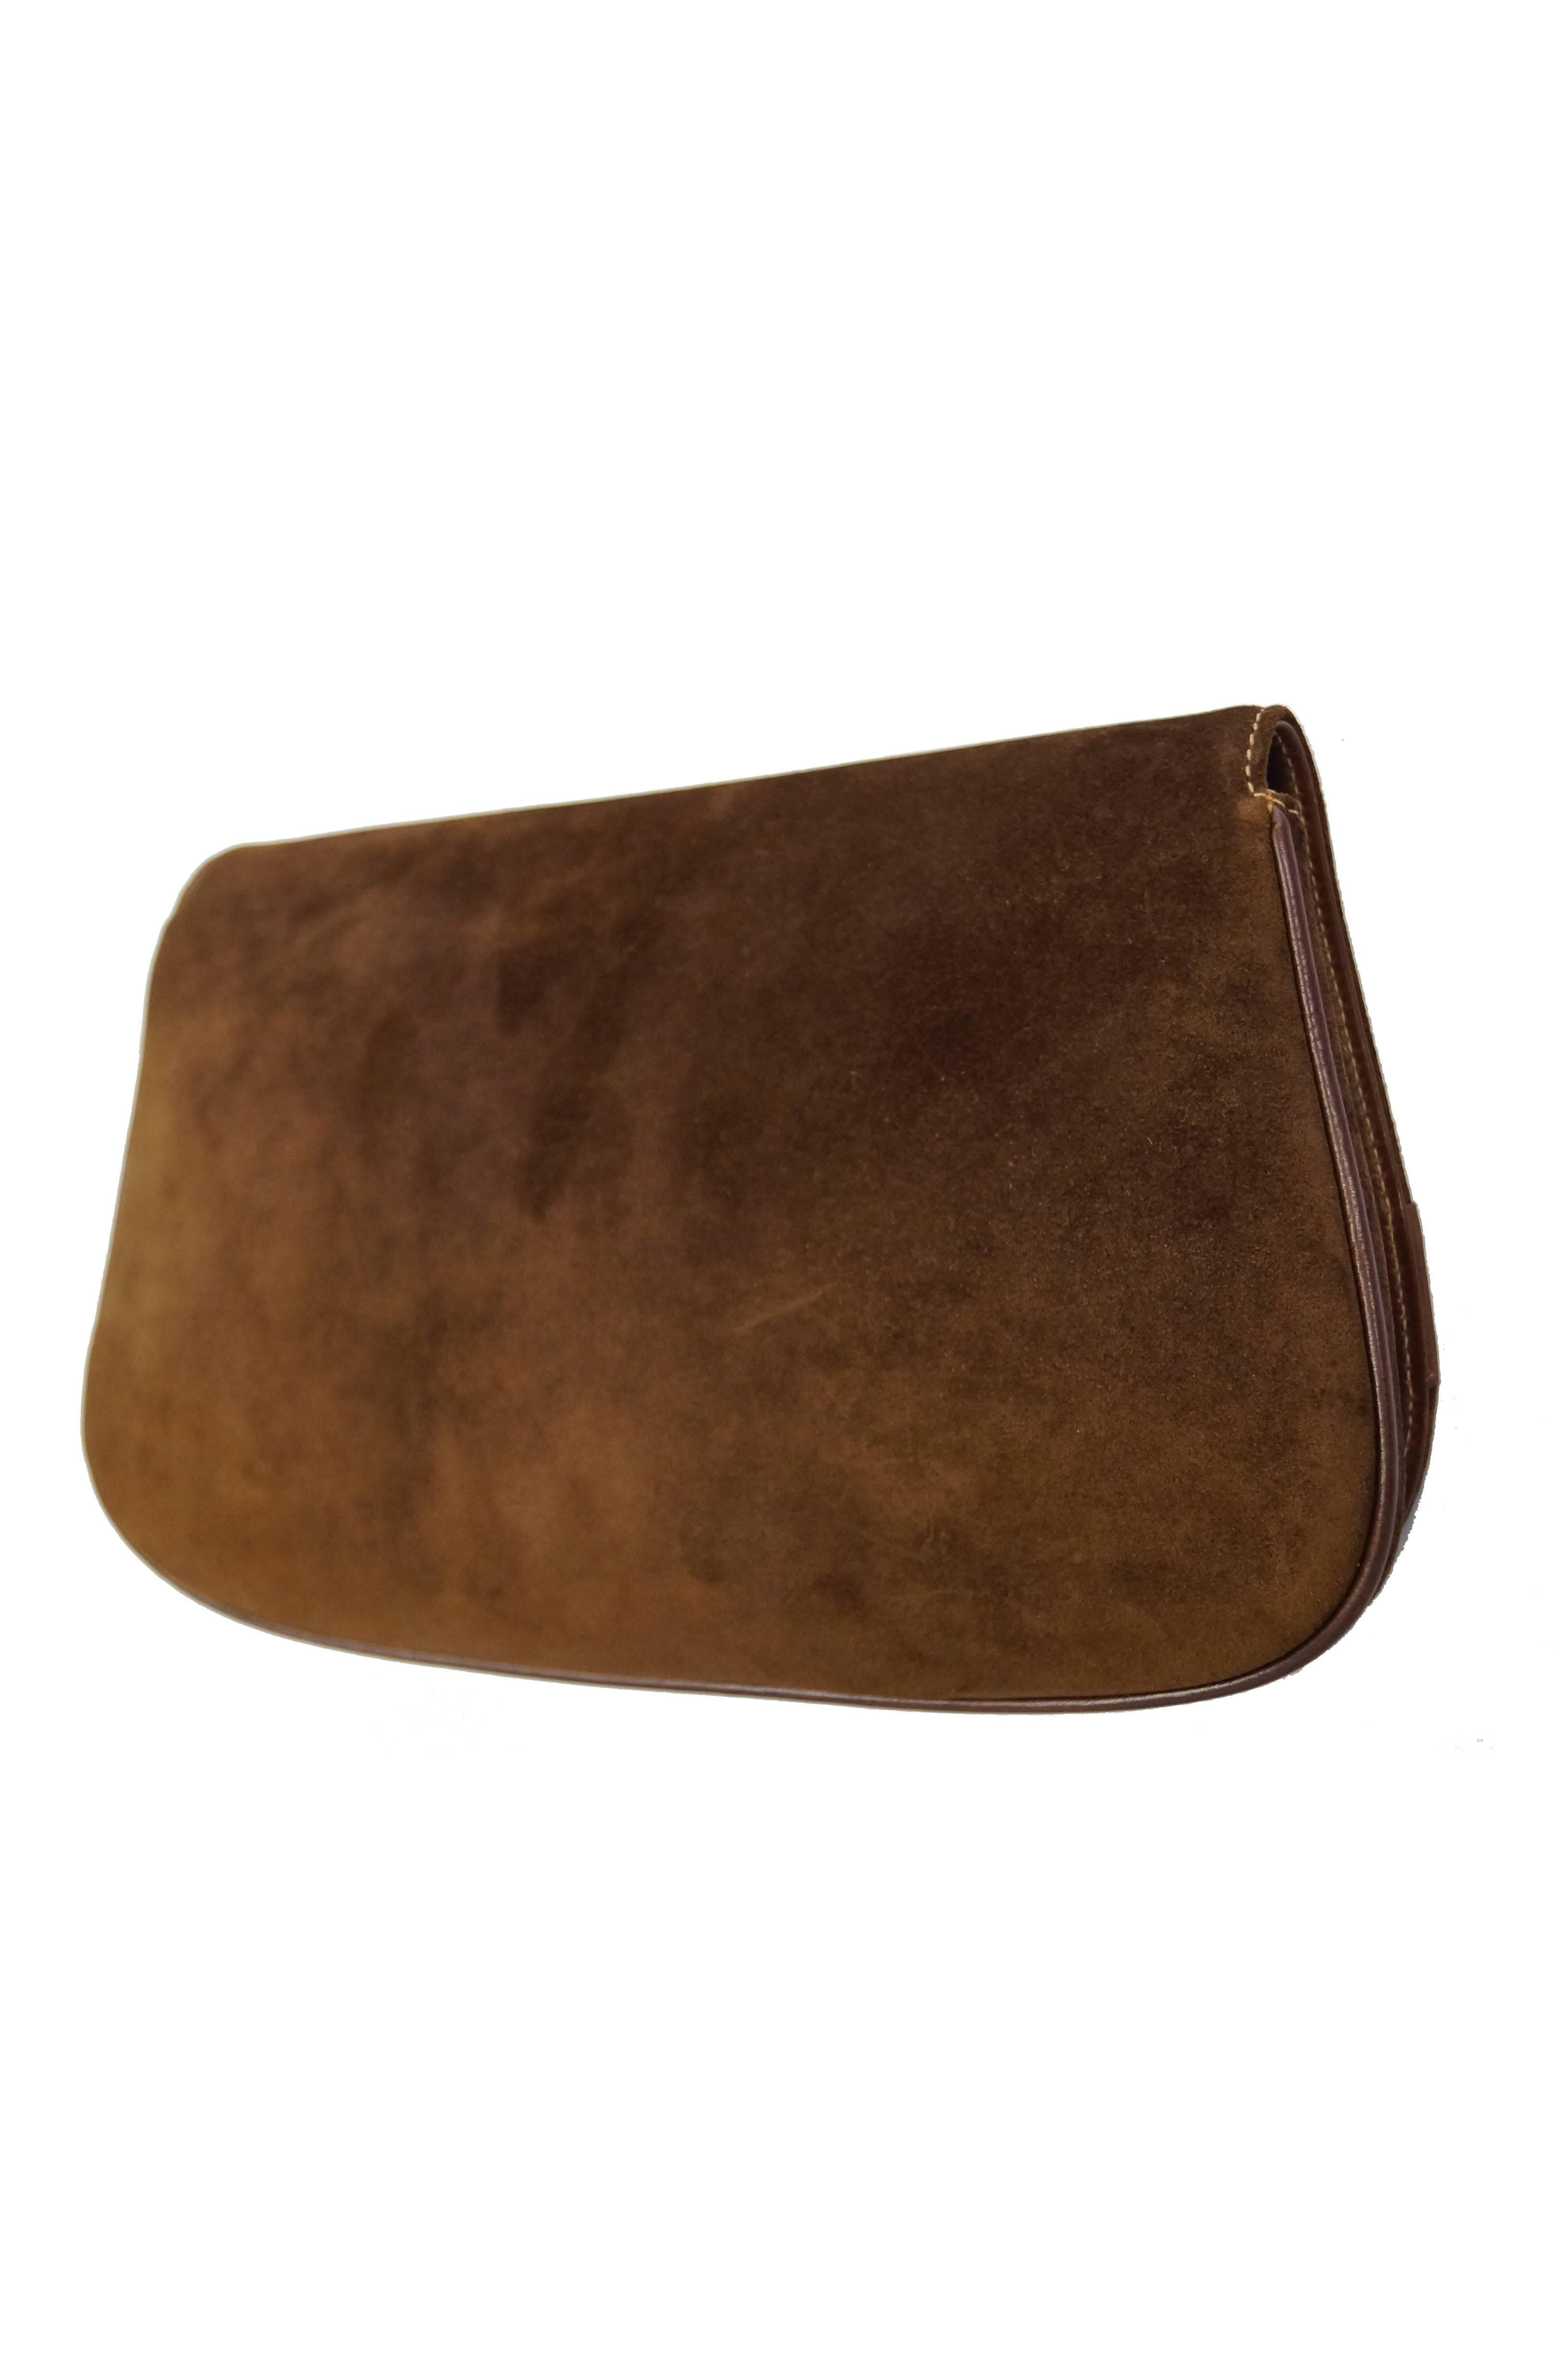 Iconic 1970s Gucci Brown Italian Suede and Leather Clutch 3